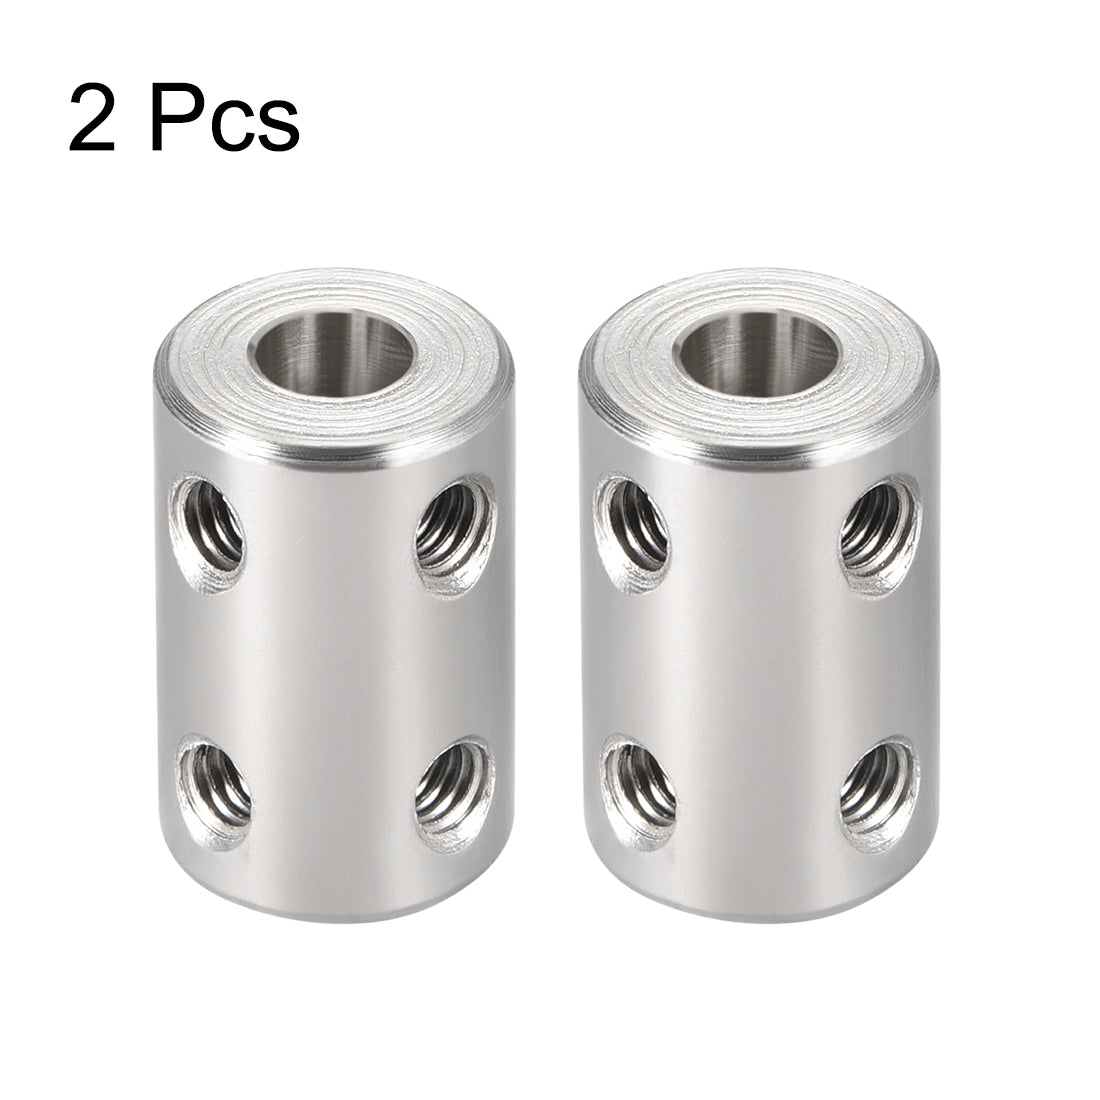 uxcell Uxcell Shaft Coupling 6mm to 6mm Bore L22xD14 Robot Motor Wheel Rigid Coupler Connector Silver Tone 2 Pcs